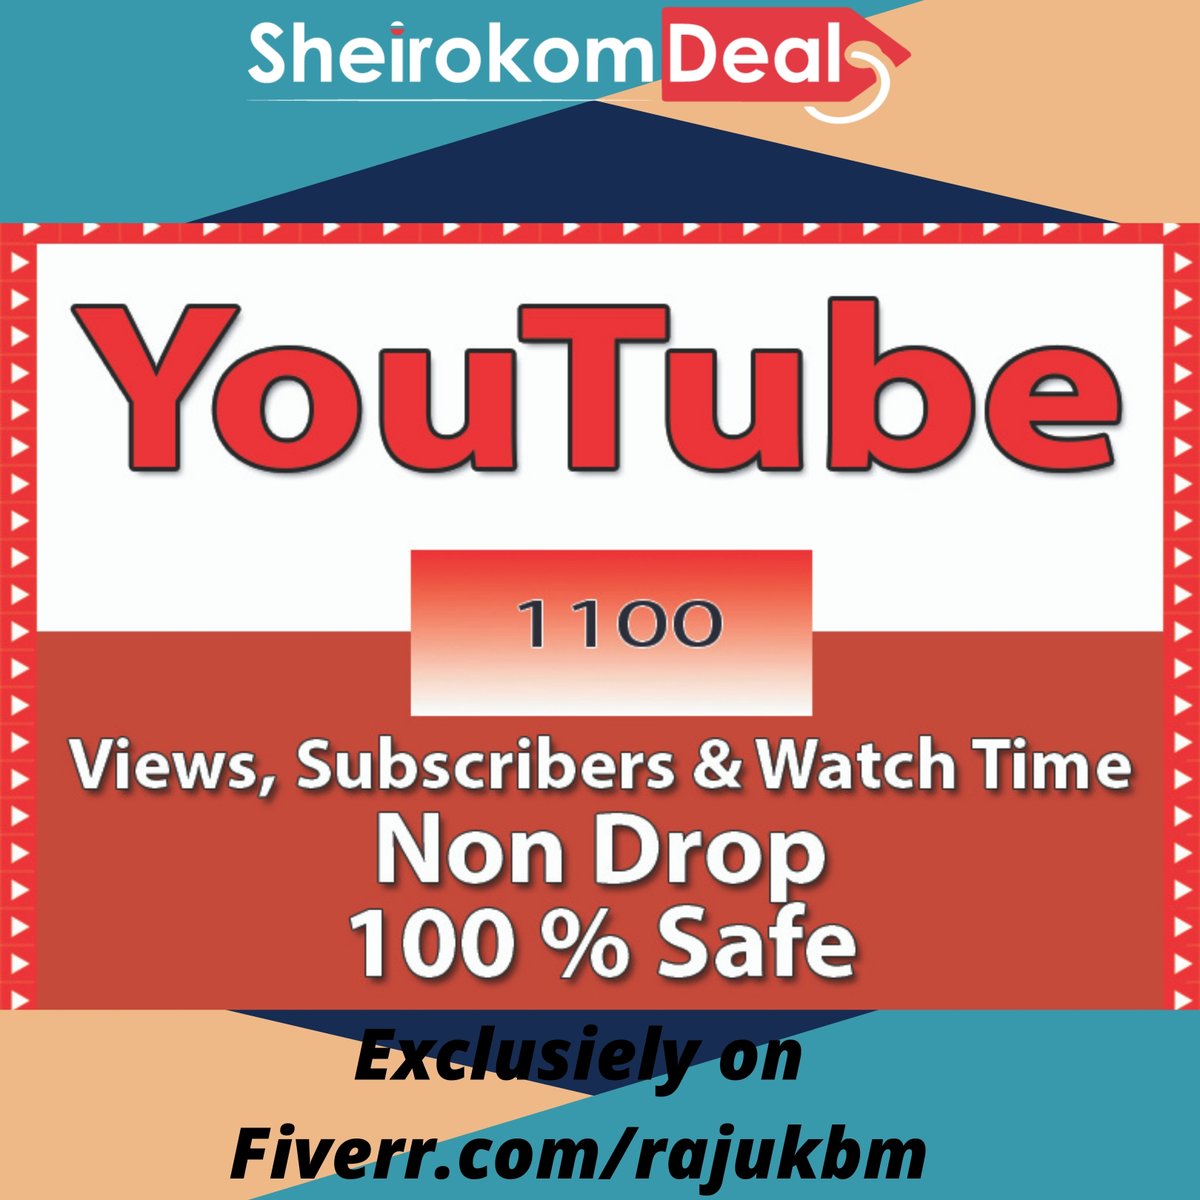 I will do organic youtube channel promotion or video promotion. My profile; bit.ly/33JwGov #youtube #youtuber #instagram #music #love #like #follow #tiktok #youtubers #spotify #video #youtubechannel #memes #gaming #facebook #subscribe #explorepage #instagood #twitch